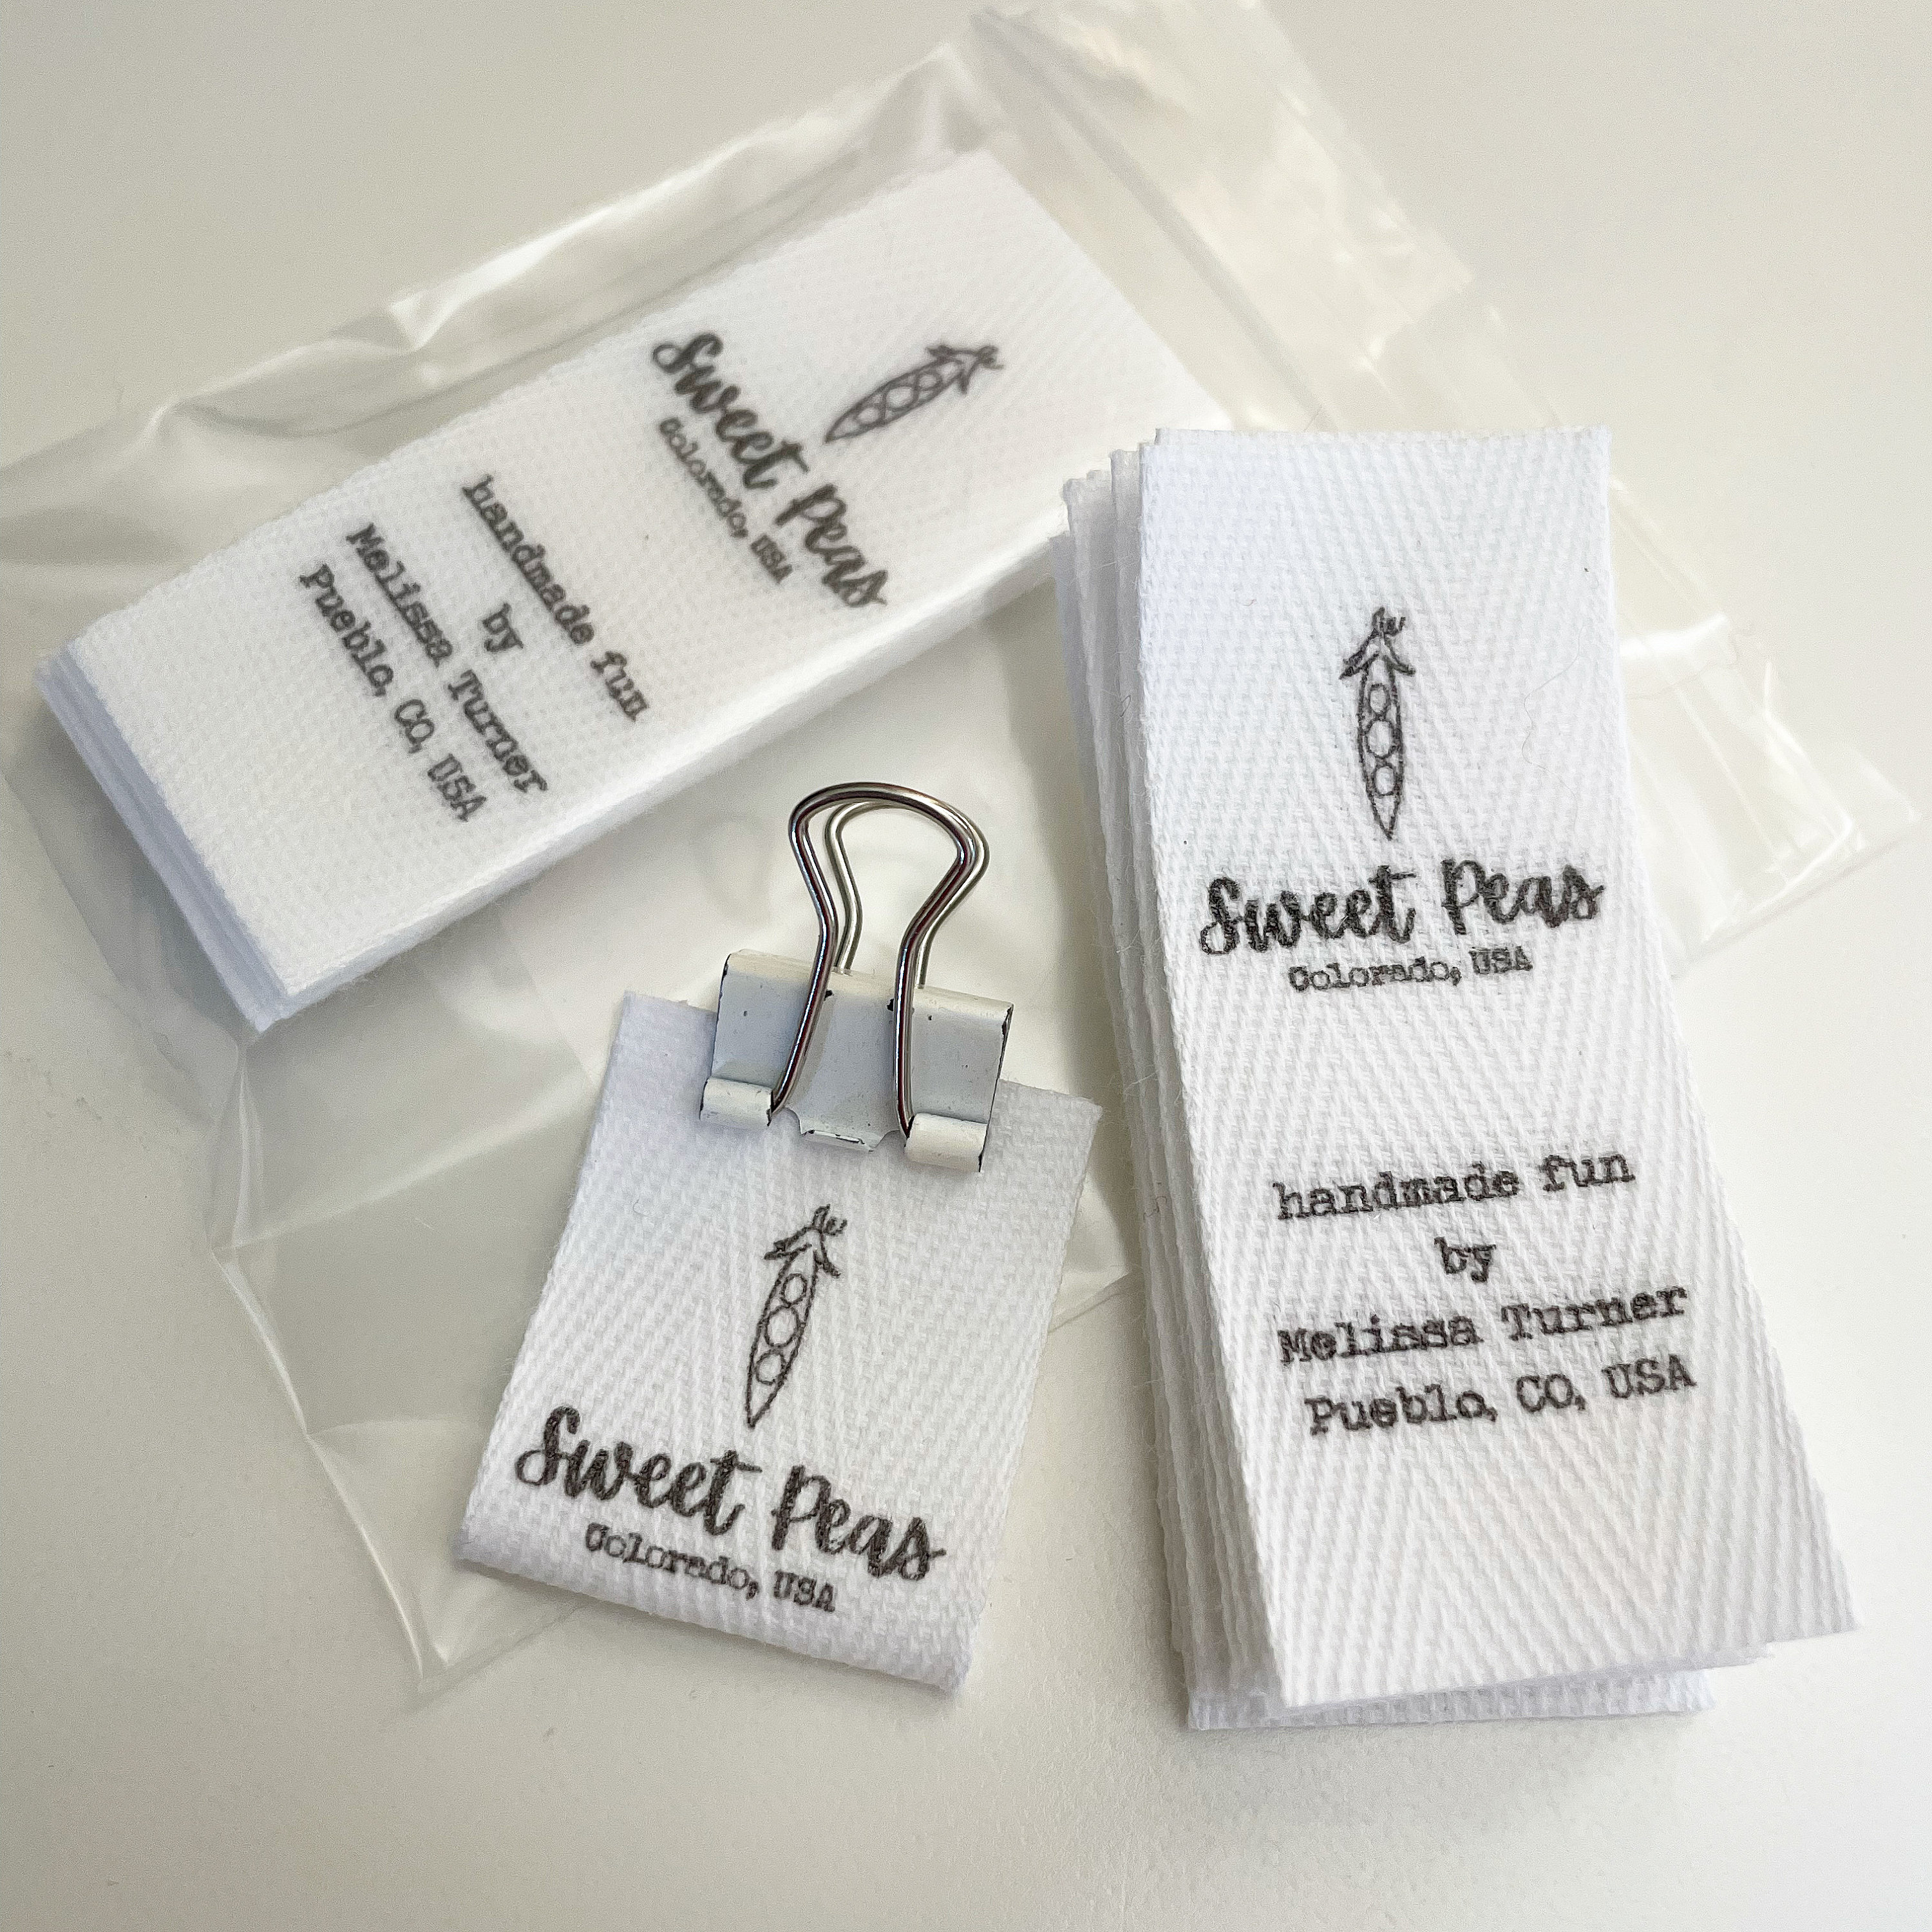 Fabric Labels for Makers Organic Cotton Sewing Tags for Handmade